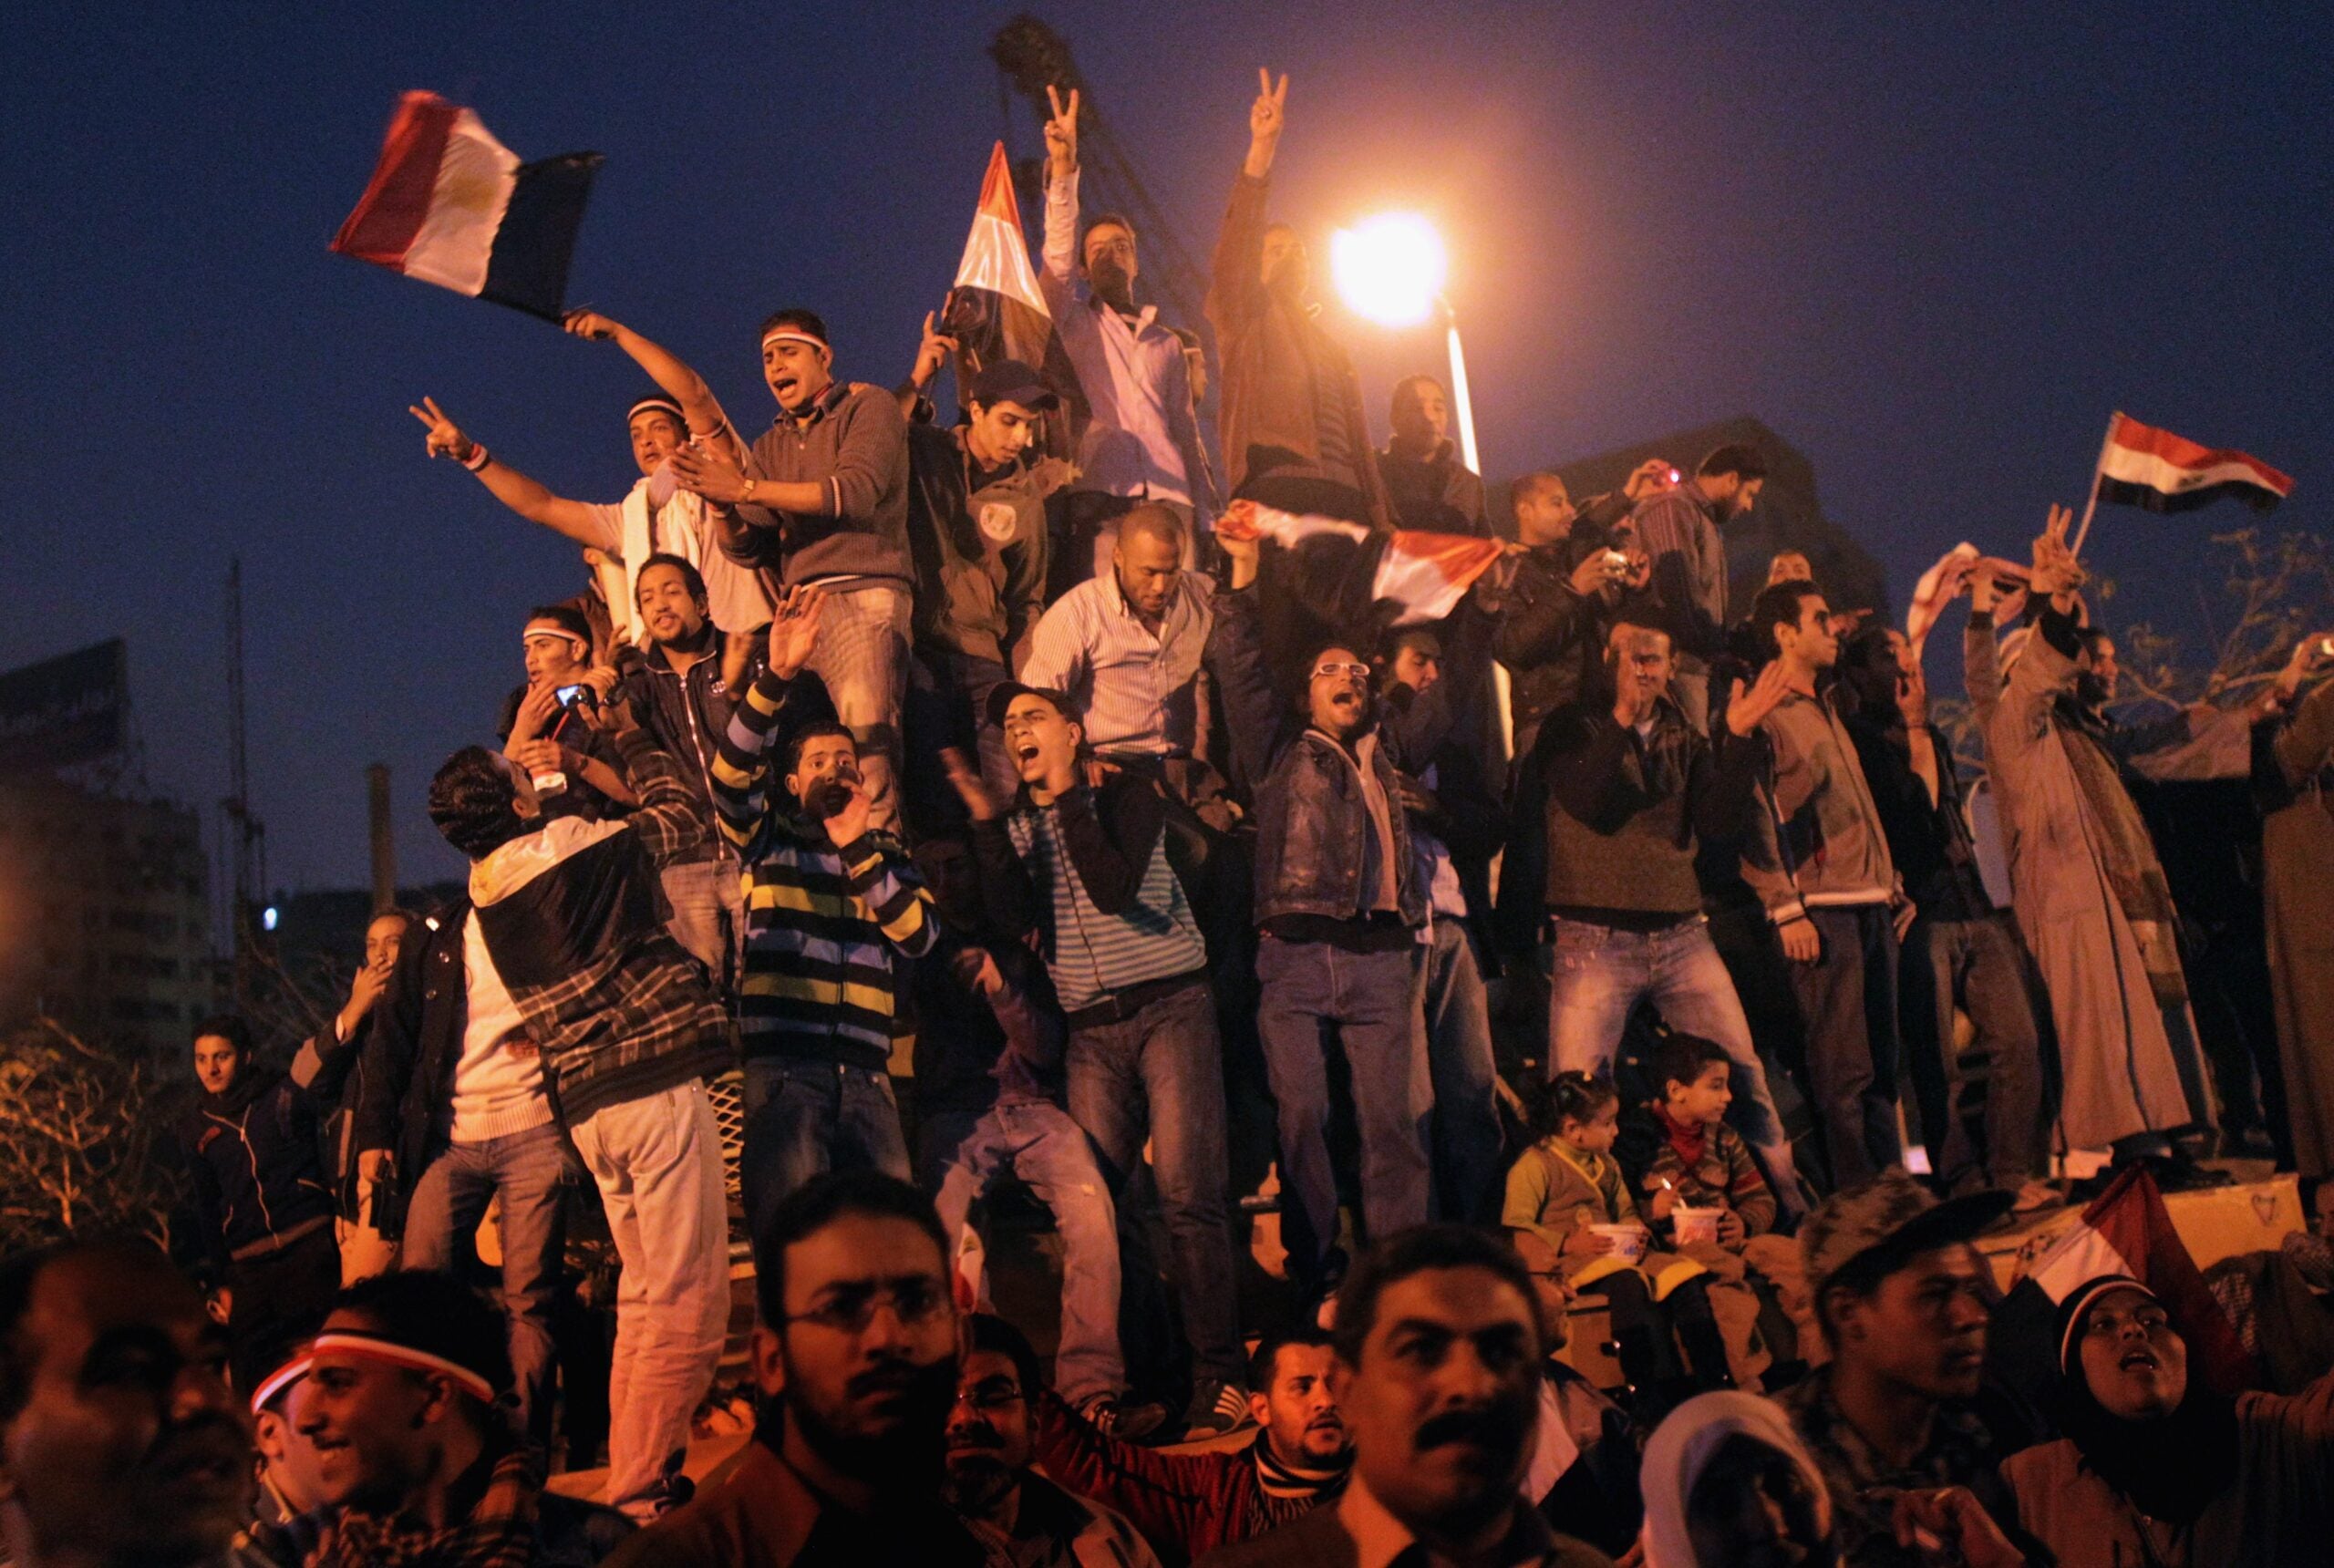 From the NS archive: How the economic policies of a corrupt elite caused the Arab Spring